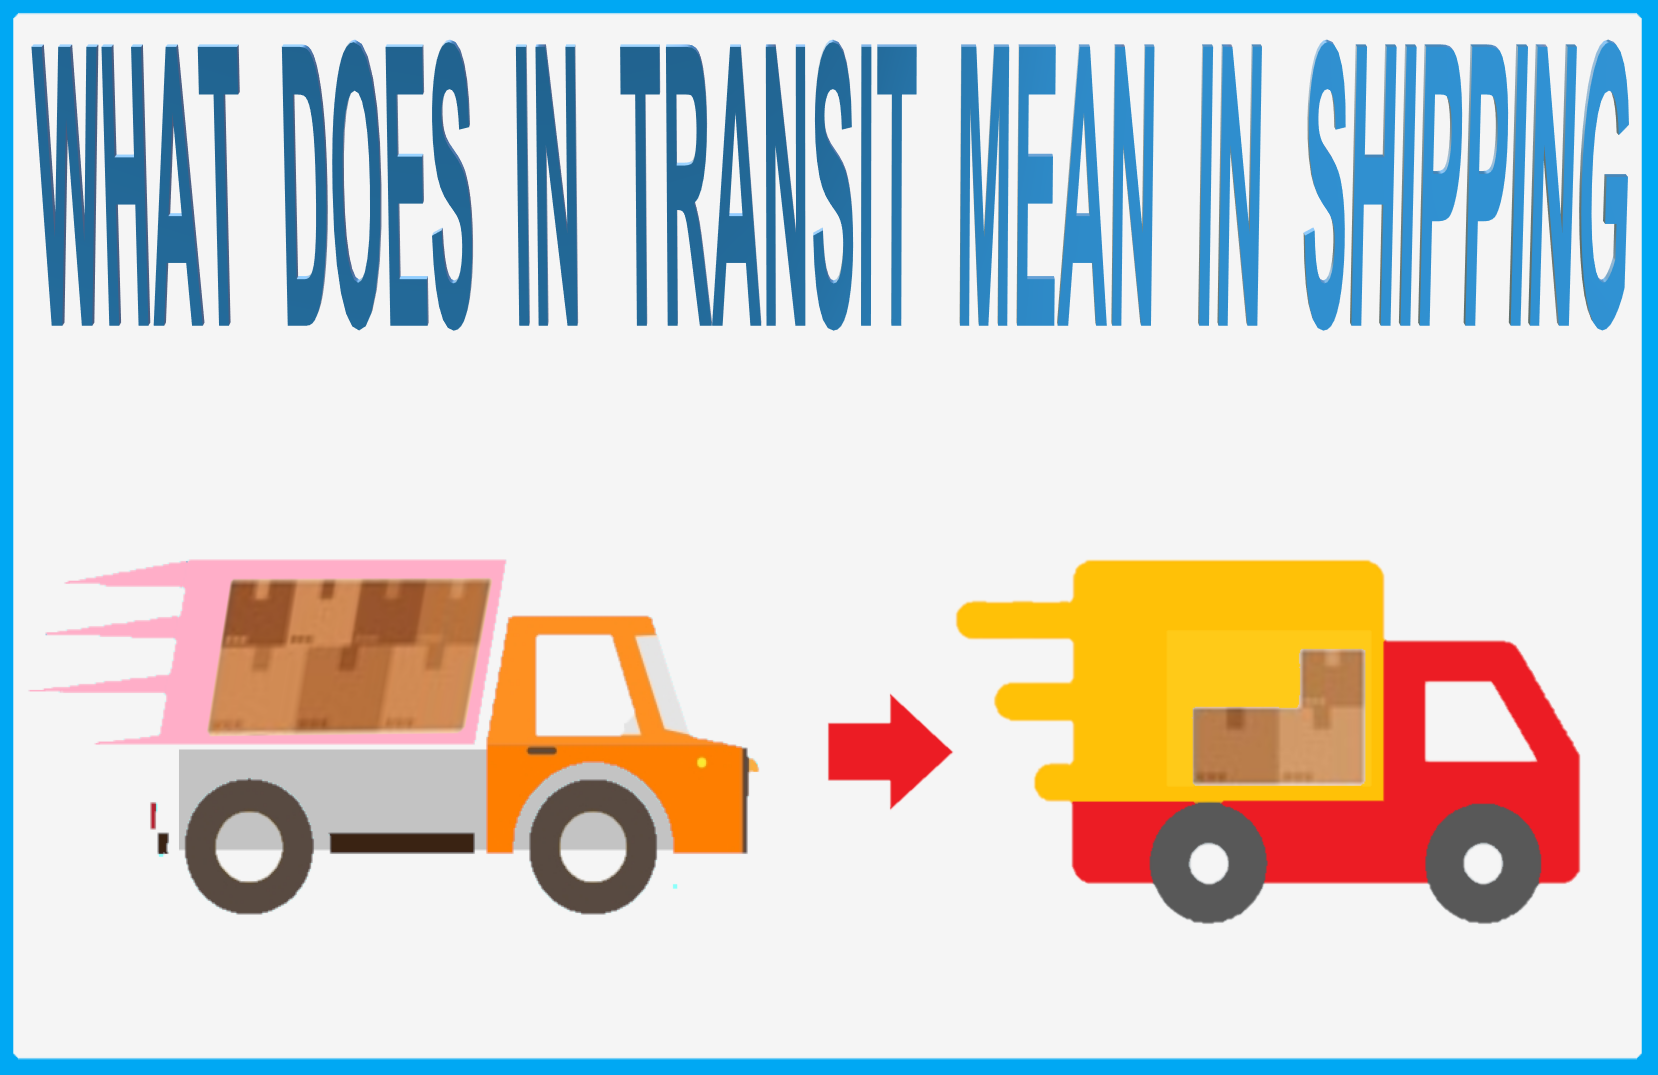 What does Transit mean in Shipping